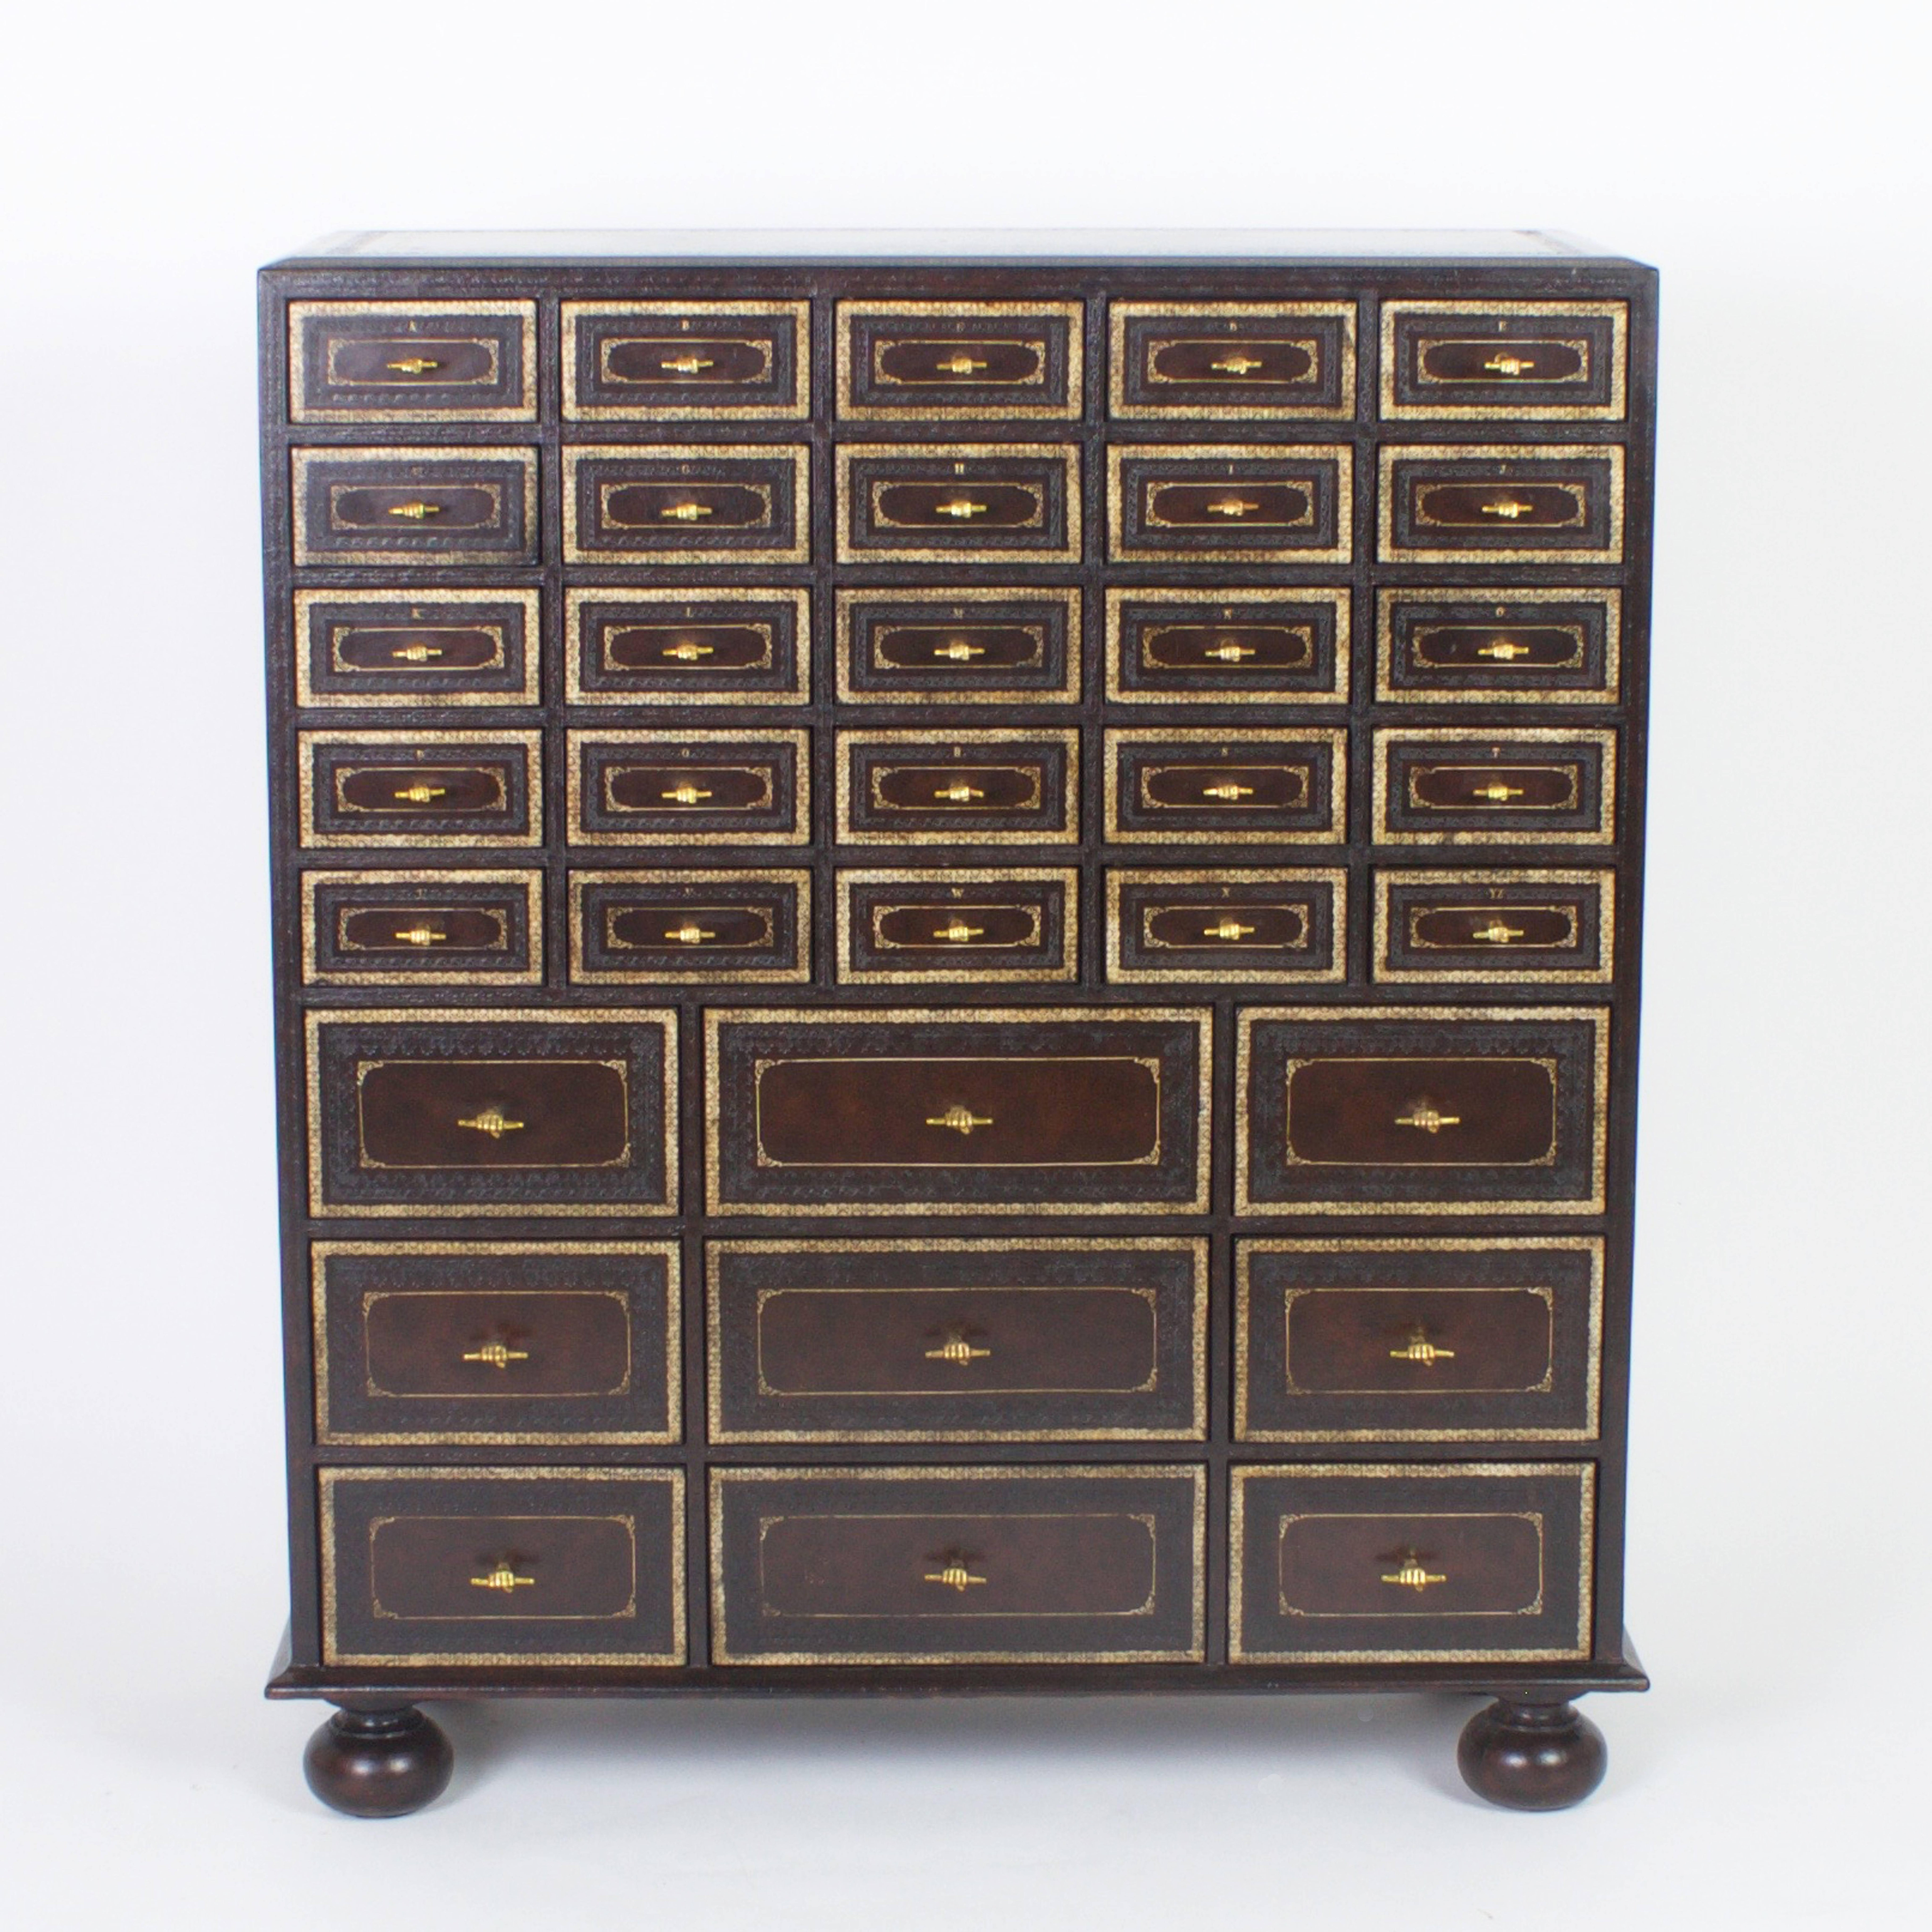 Rare and unusual Mid-Century Maitland-Smith chest of many drawers, 34 to be exact. The case and drawer fronts are entirely clad in finely tooled and gold trimmed oxblood leather. The smaller, upper drawers are labeled A through Z and all lined with